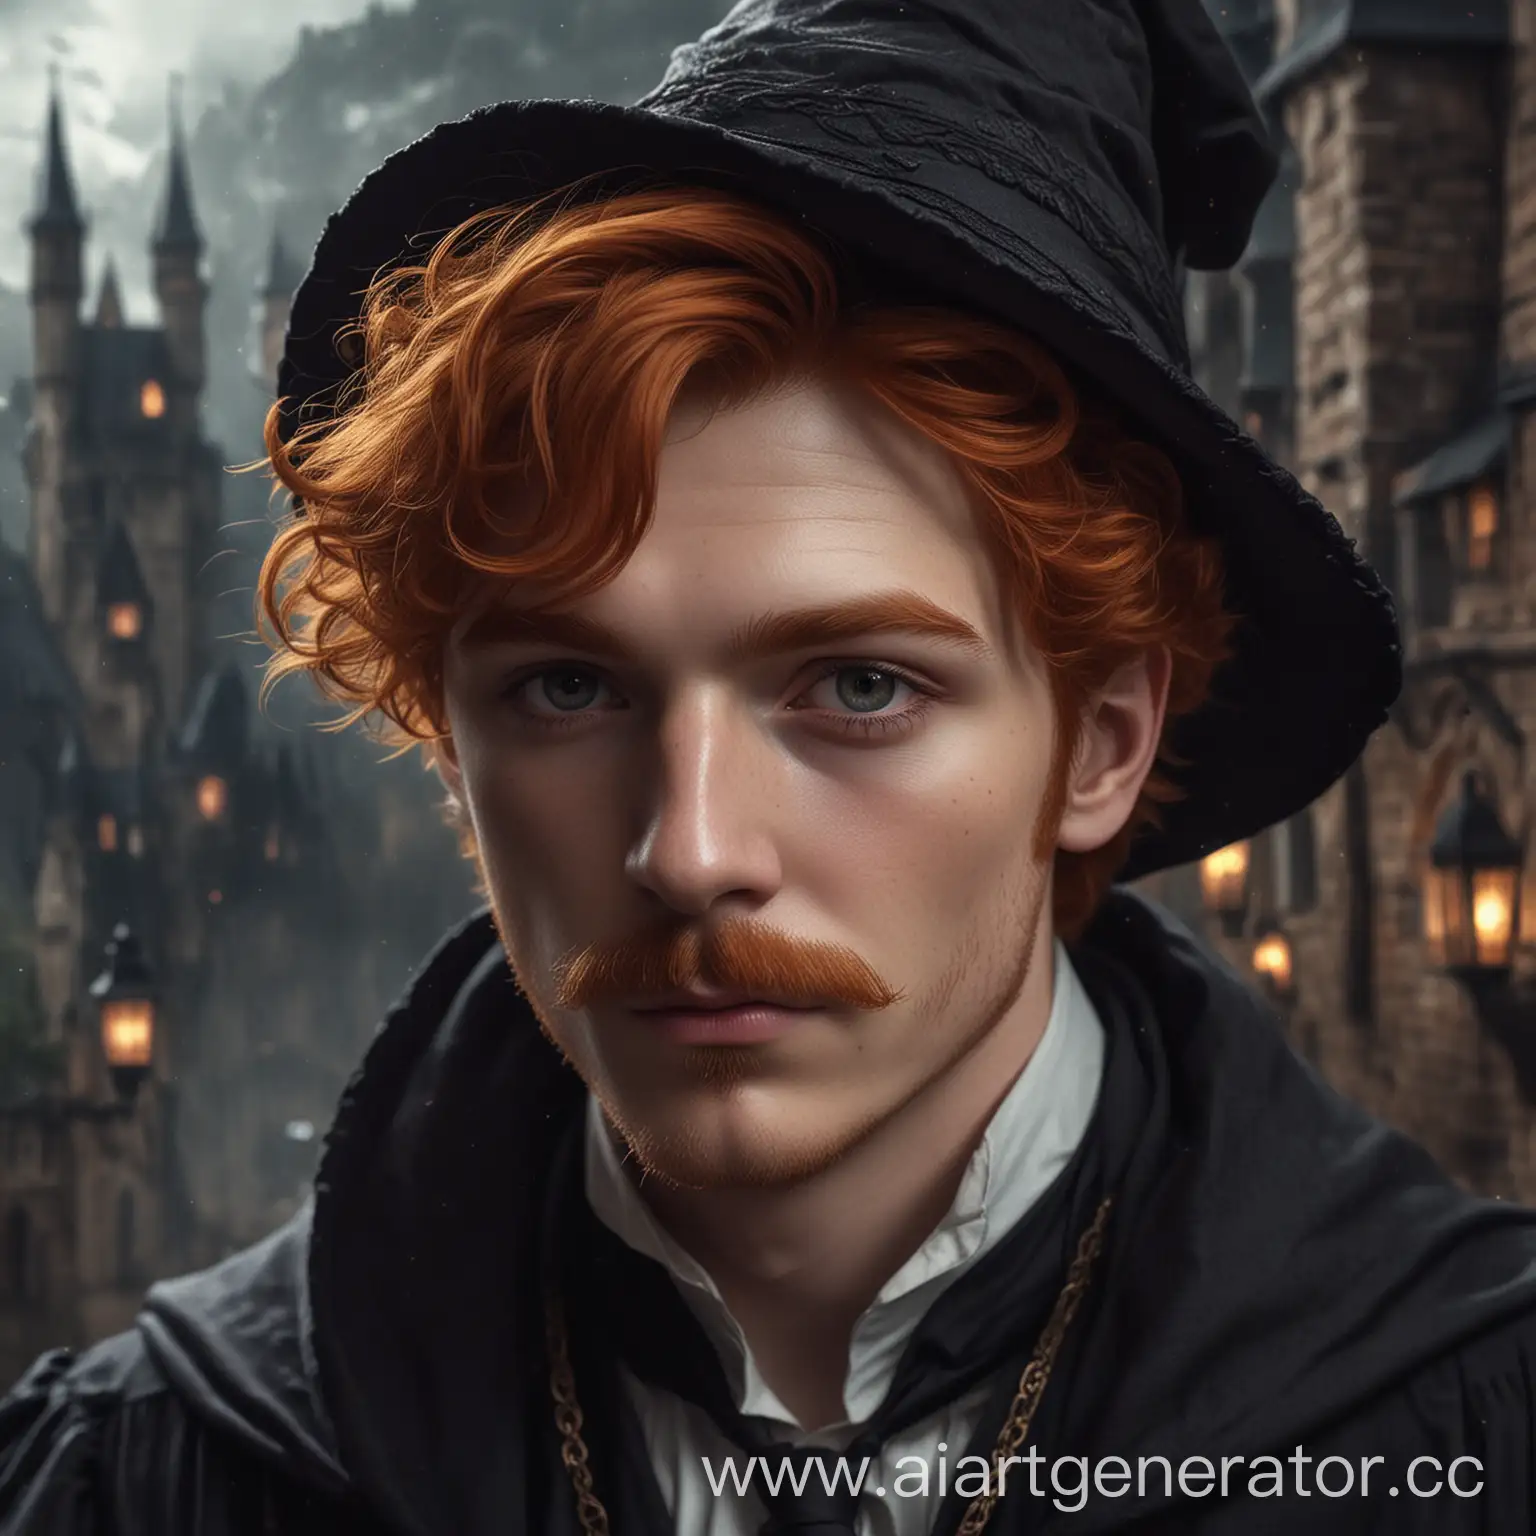 Young-Wizard-with-Ginger-Hair-and-Mustache-in-Fantasy-Setting